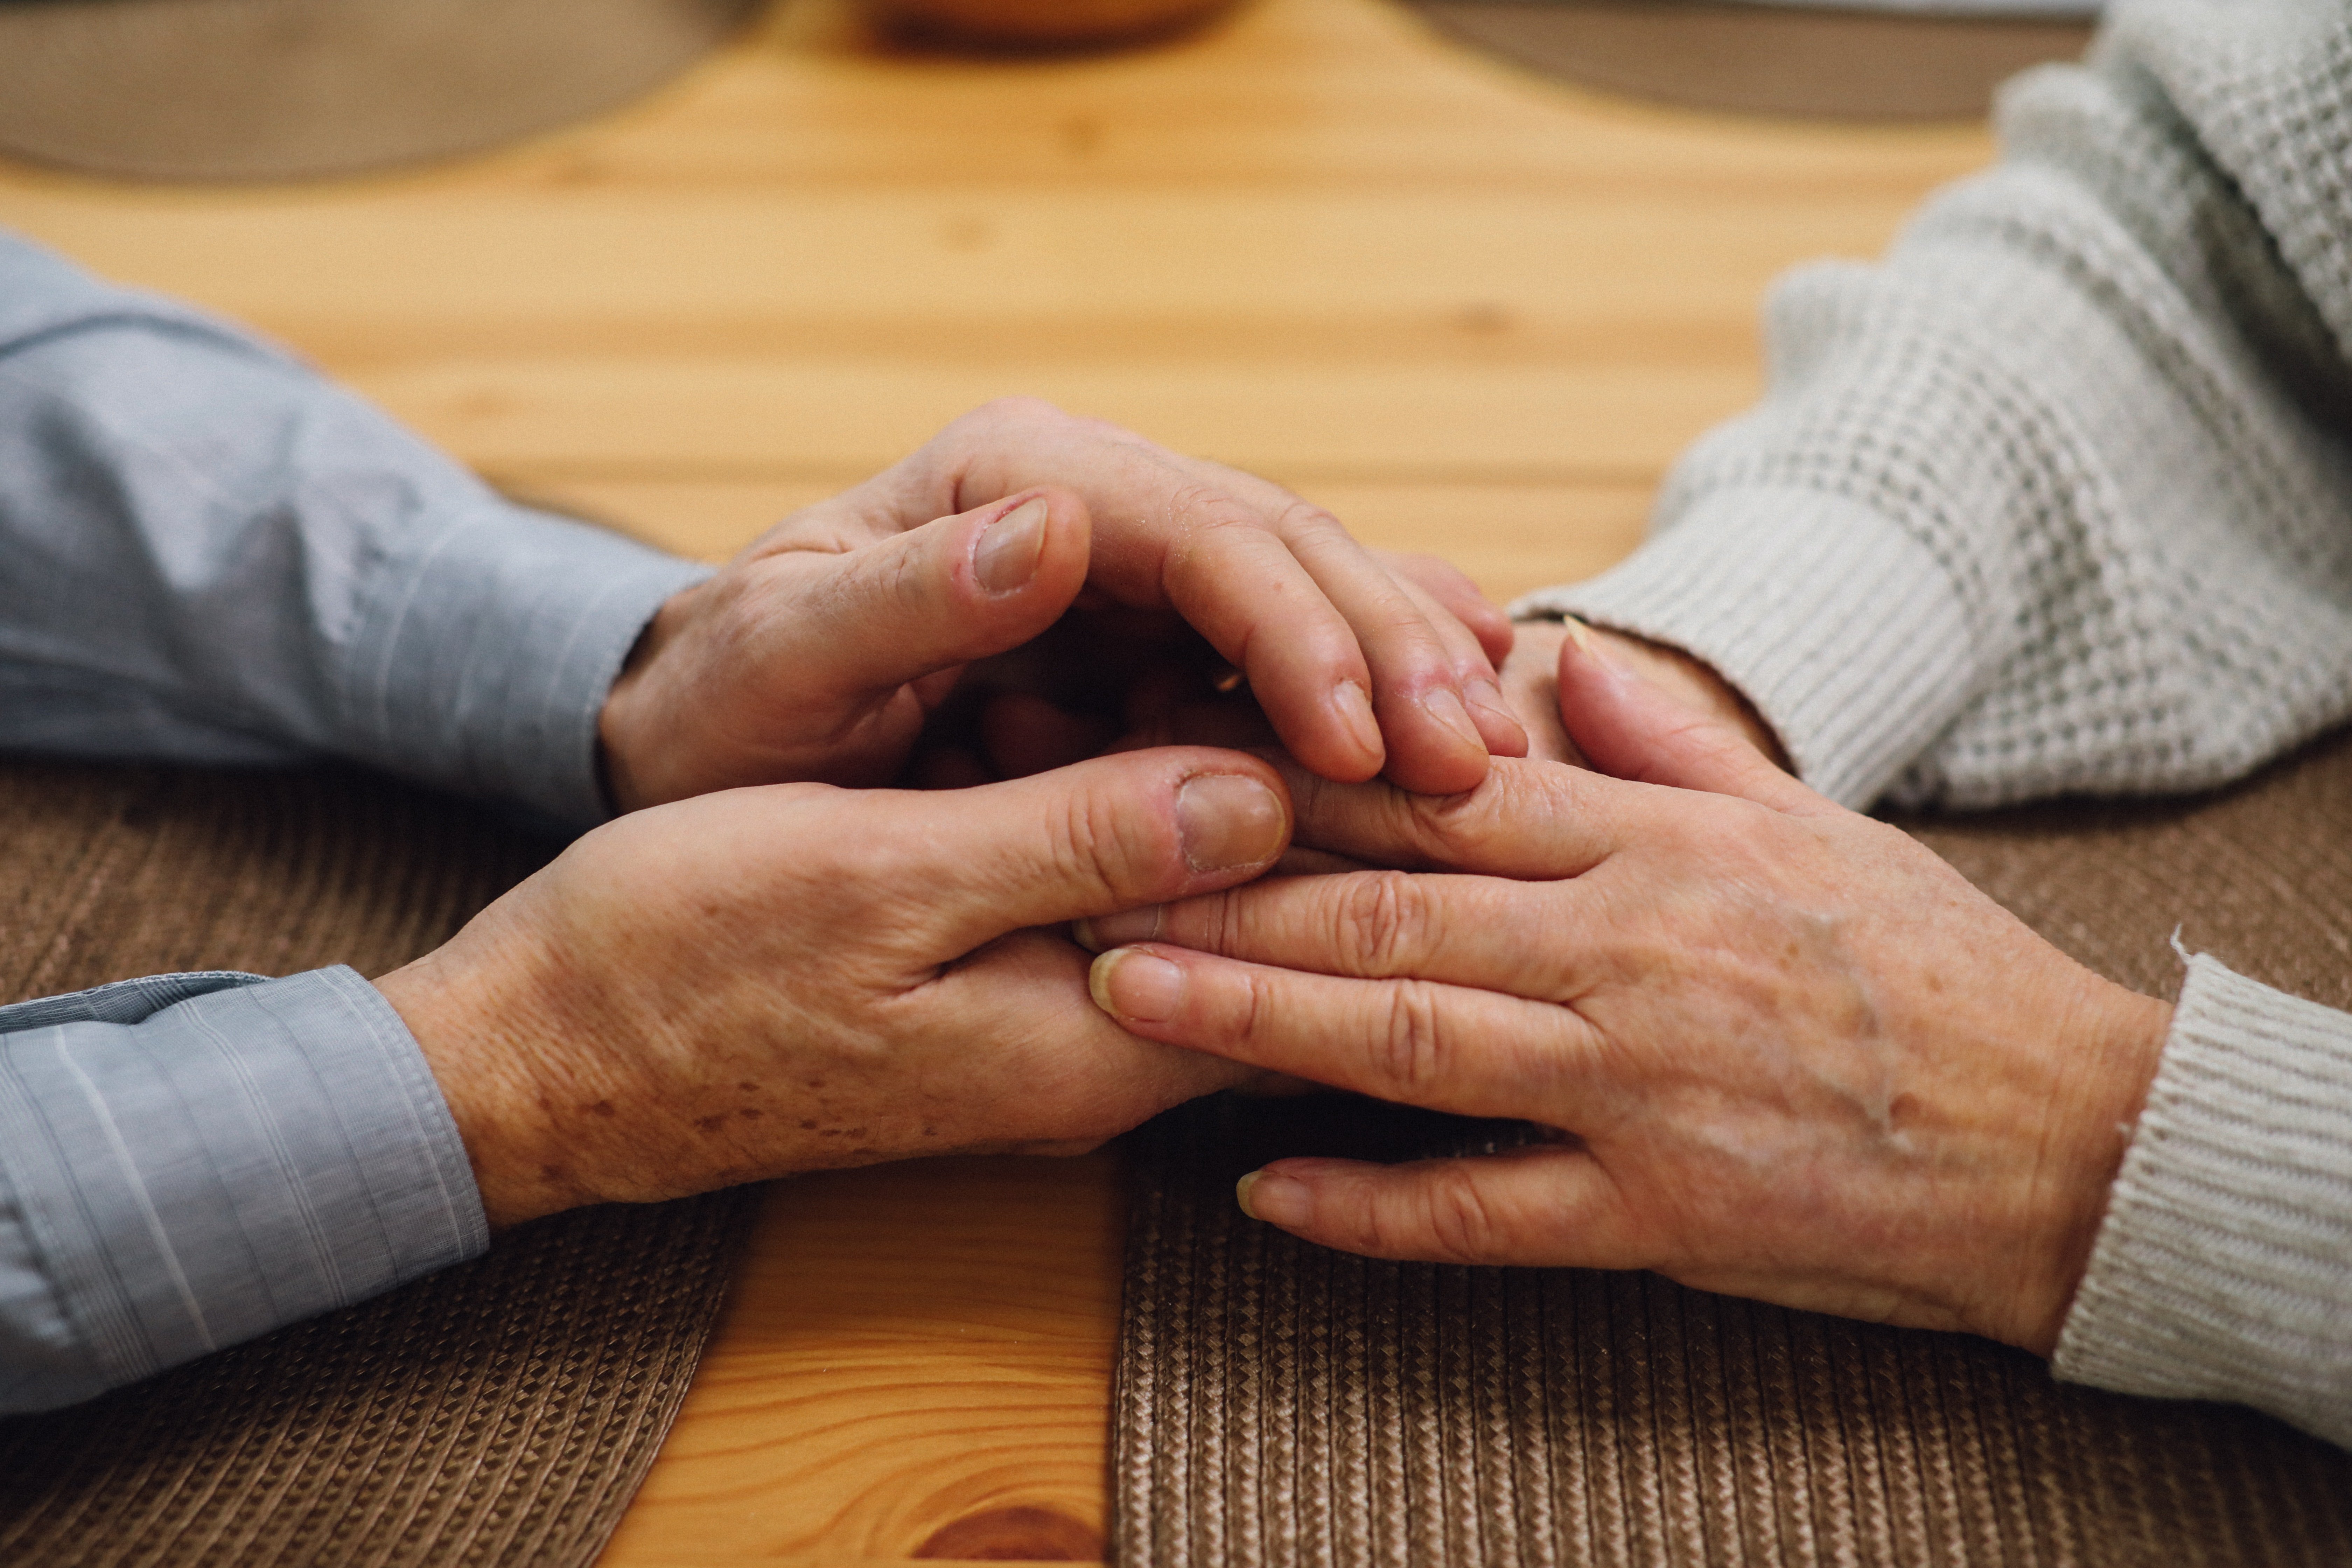 An older couple holding hands across a table. | Source: Pexels/ Tom Leishman